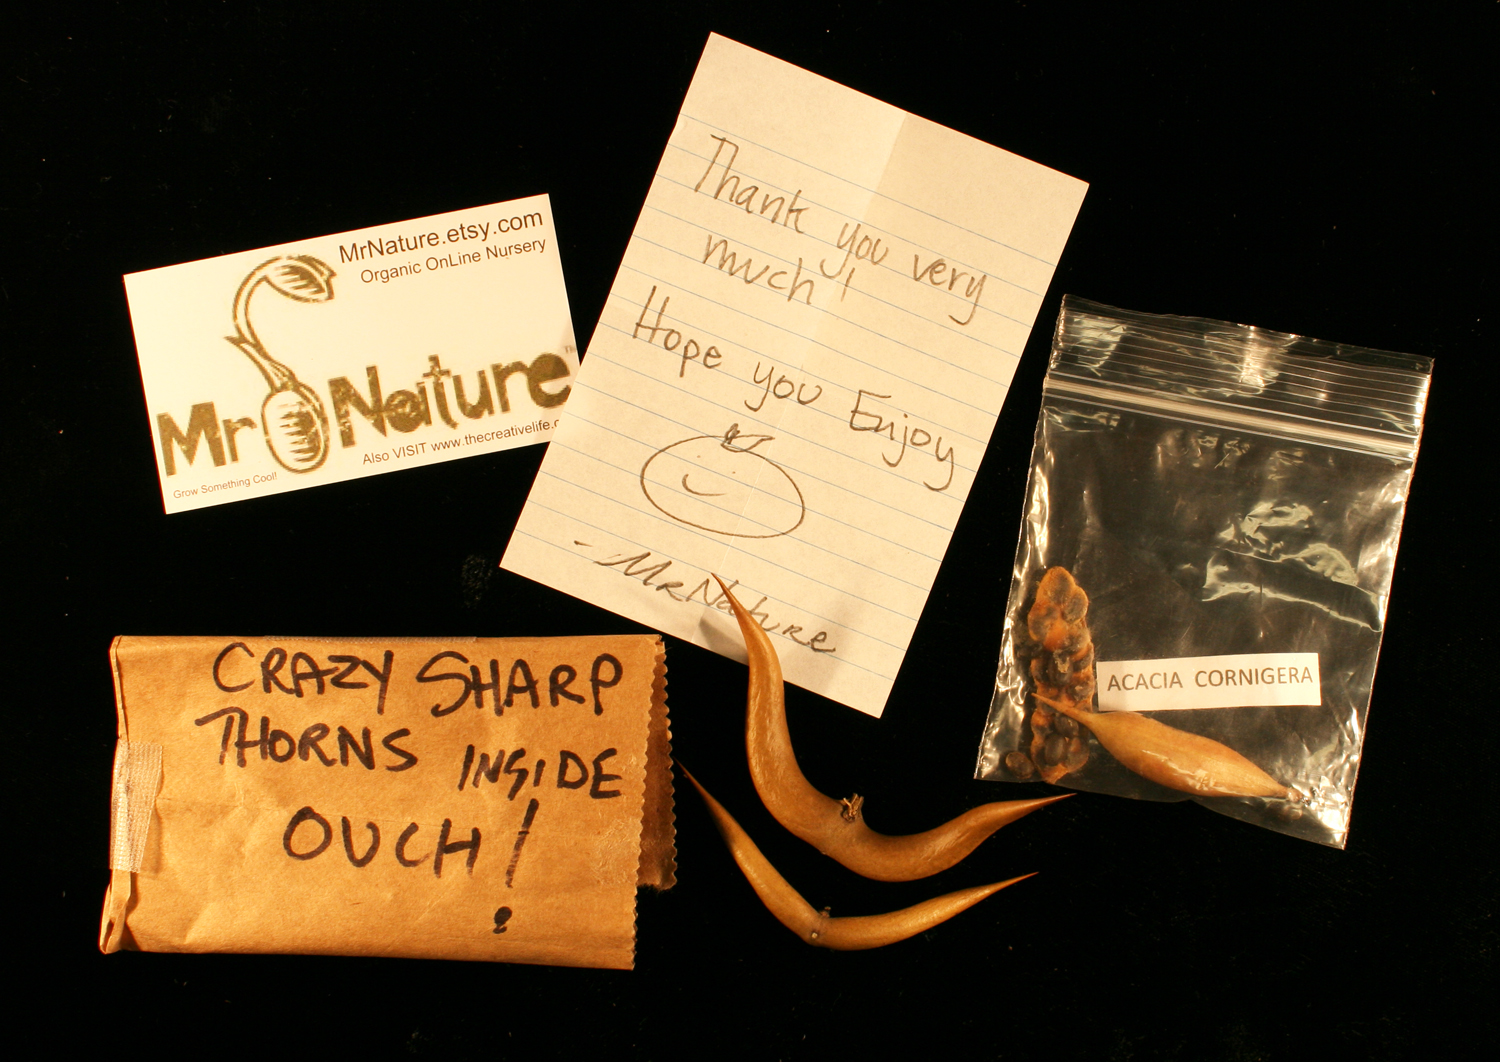 Contents of a package reading "Crazy sharp thorns inside ouch!" of the plant acacia cornigera